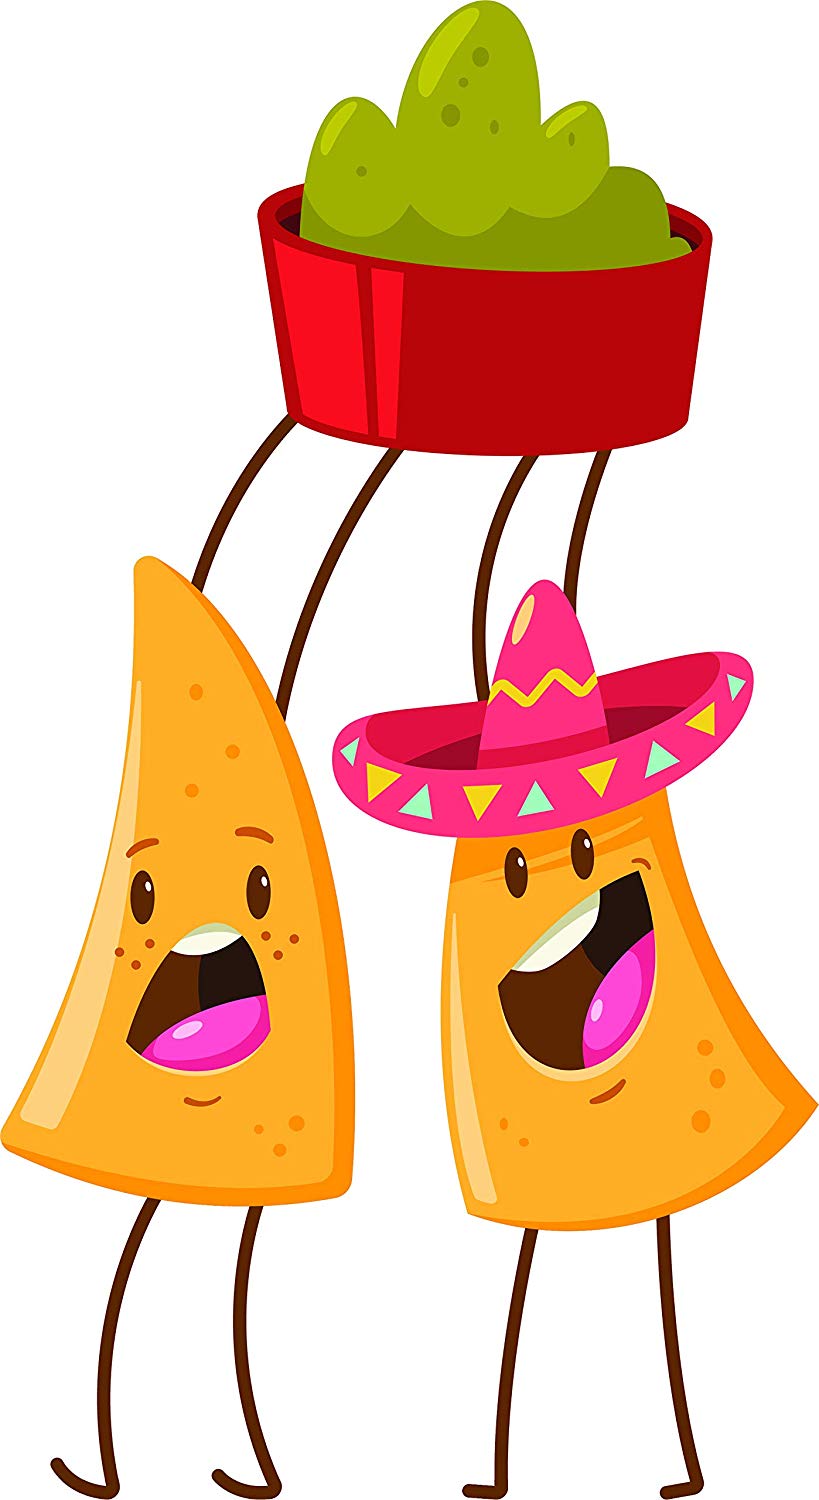 Nacho clipart happy, Nacho happy Transparent FREE for download on